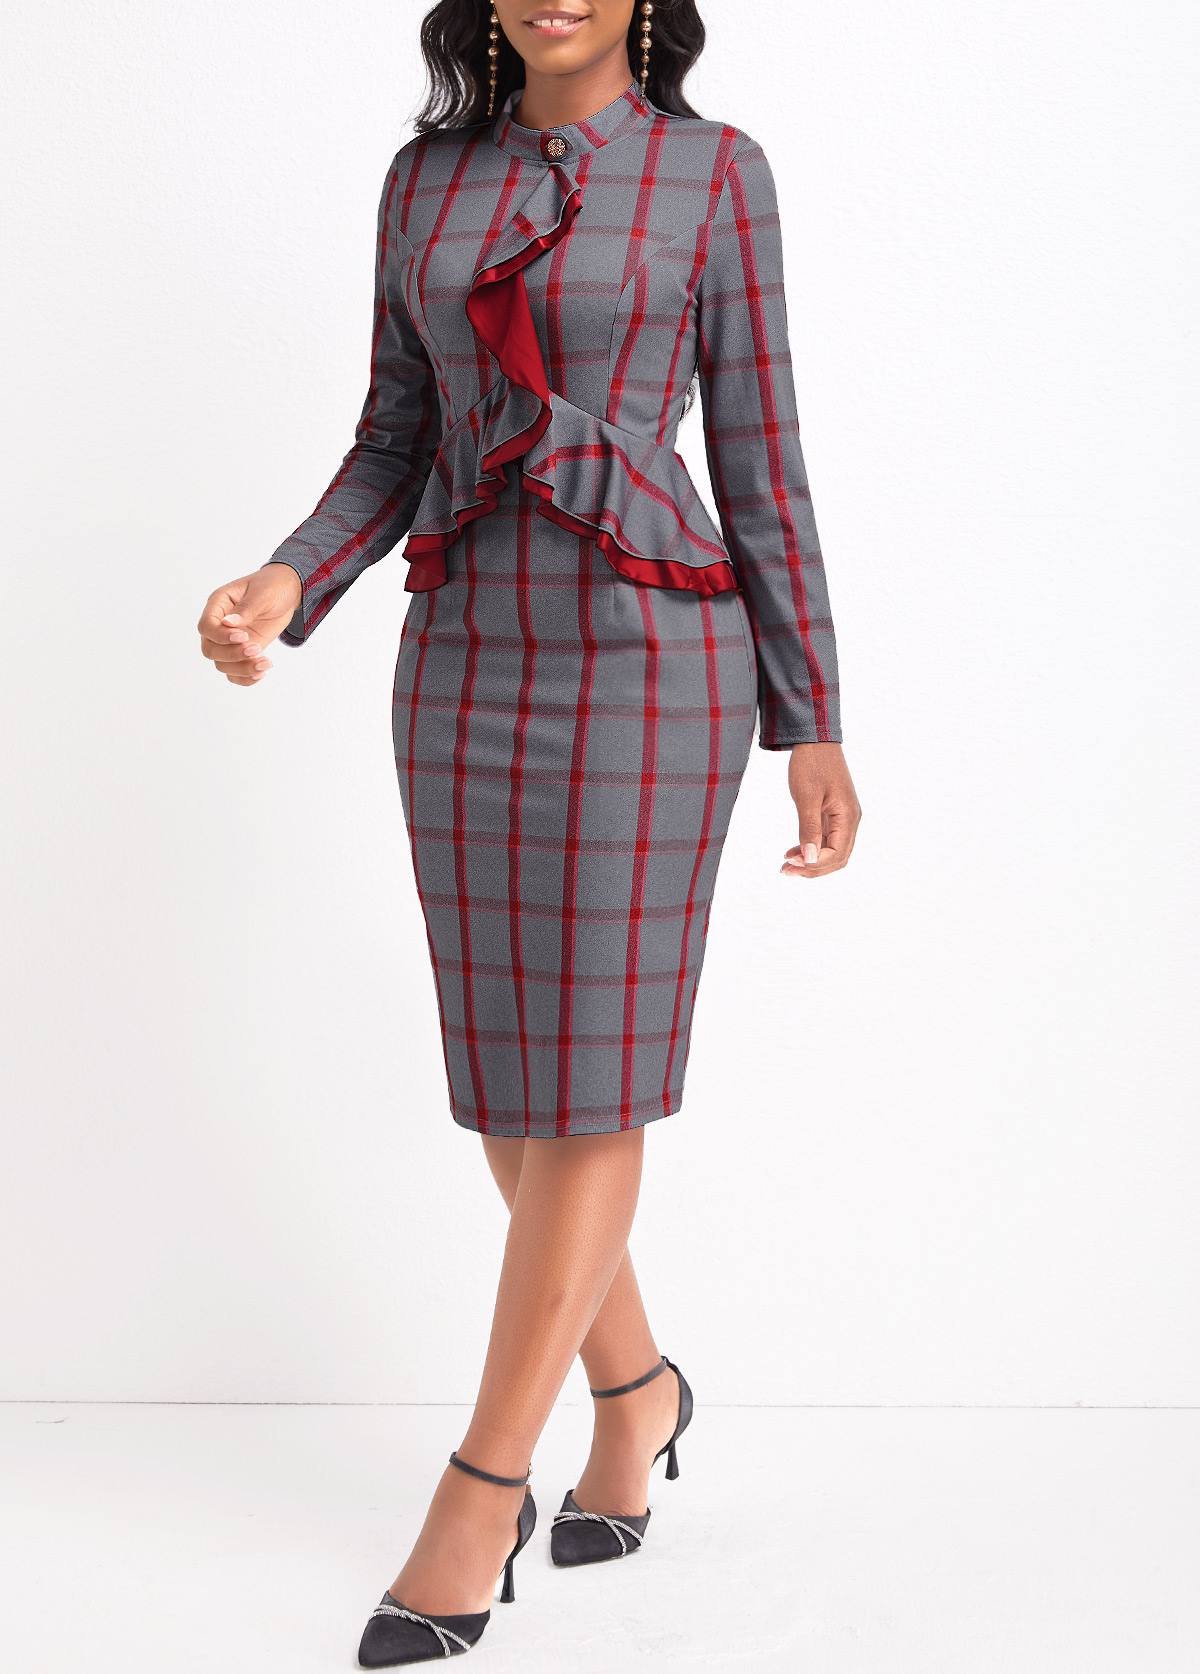 Plaid Ruffle Red Long Sleeve Stand Collar Bodycon Dress